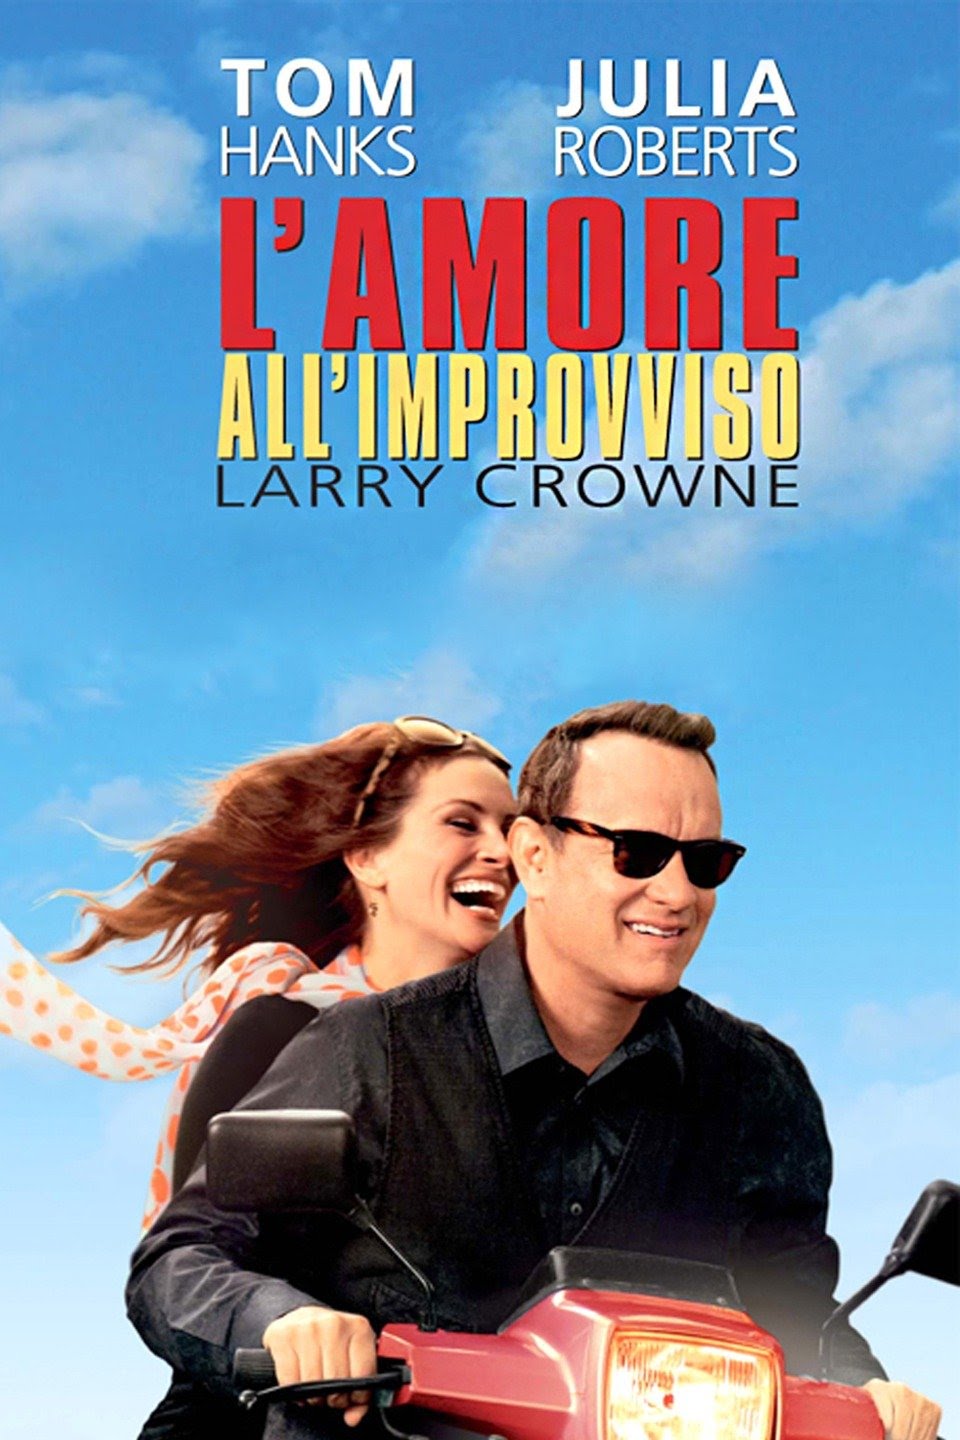 L’amore all’improvviso – Larry Crowne [HD] (2011)